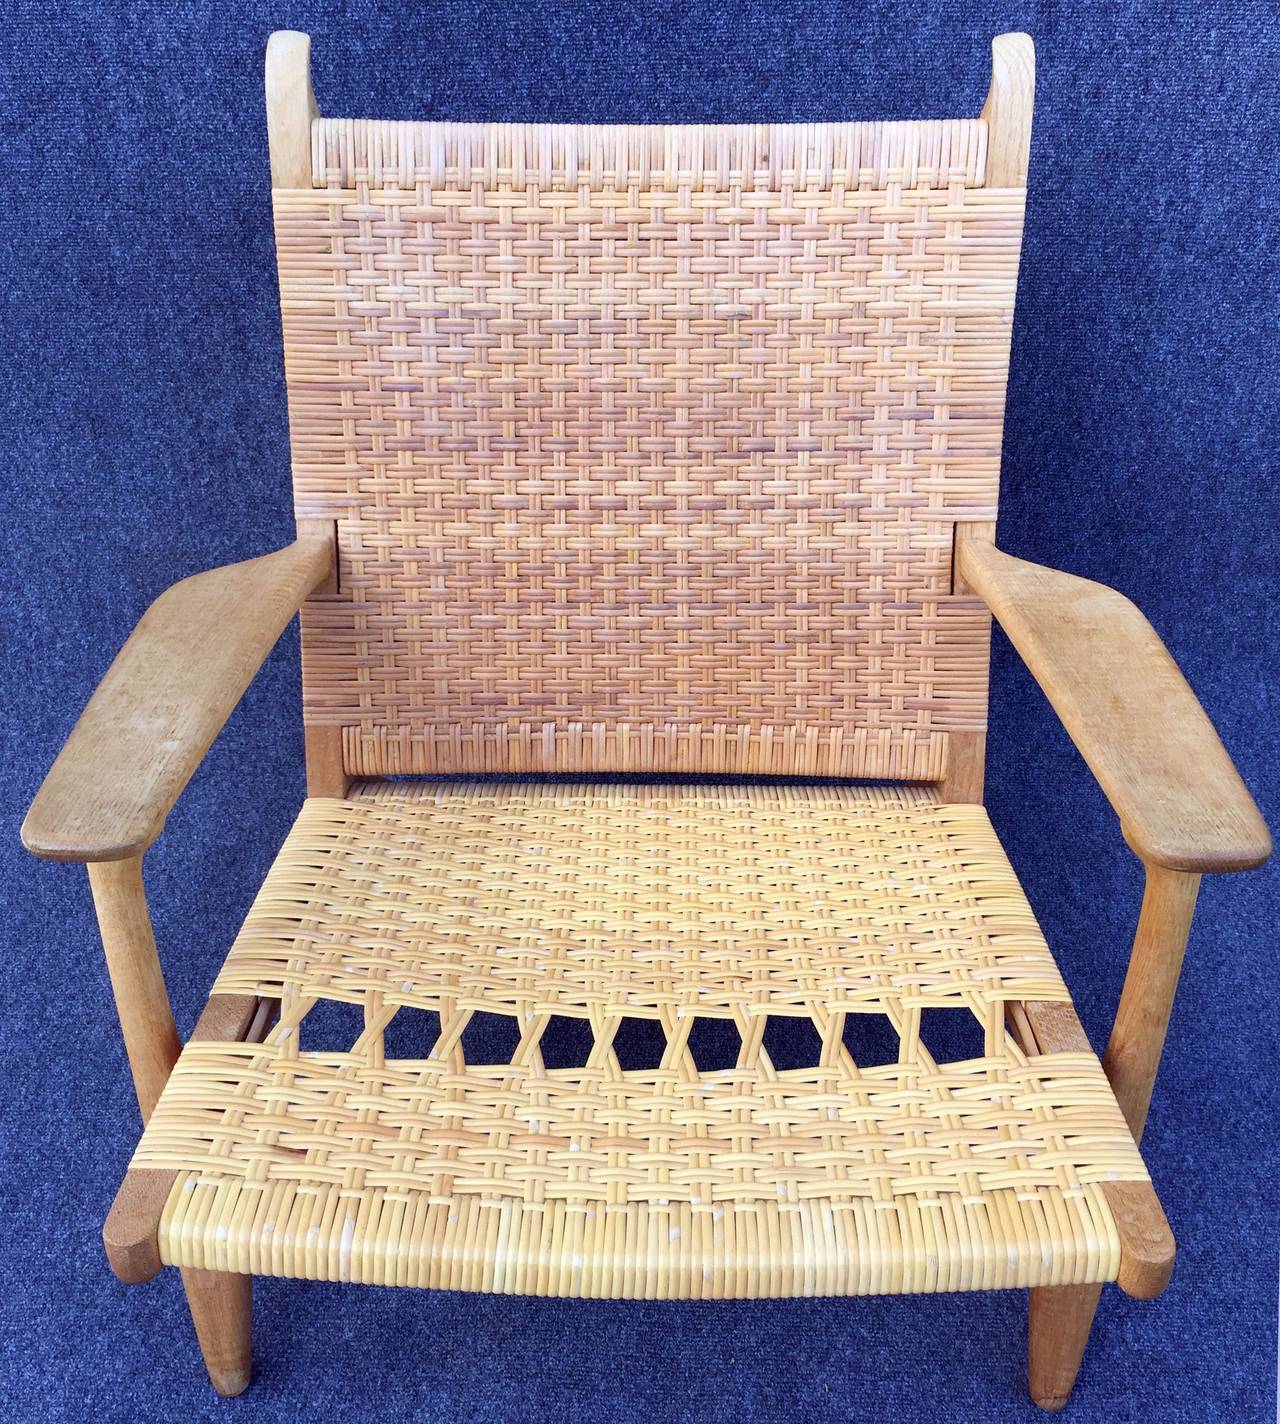 This one is in very good condition, the seat has been recently re-caned, so until it has been sat in for a while there is a slight difference in the colour of the seat compared to the back.